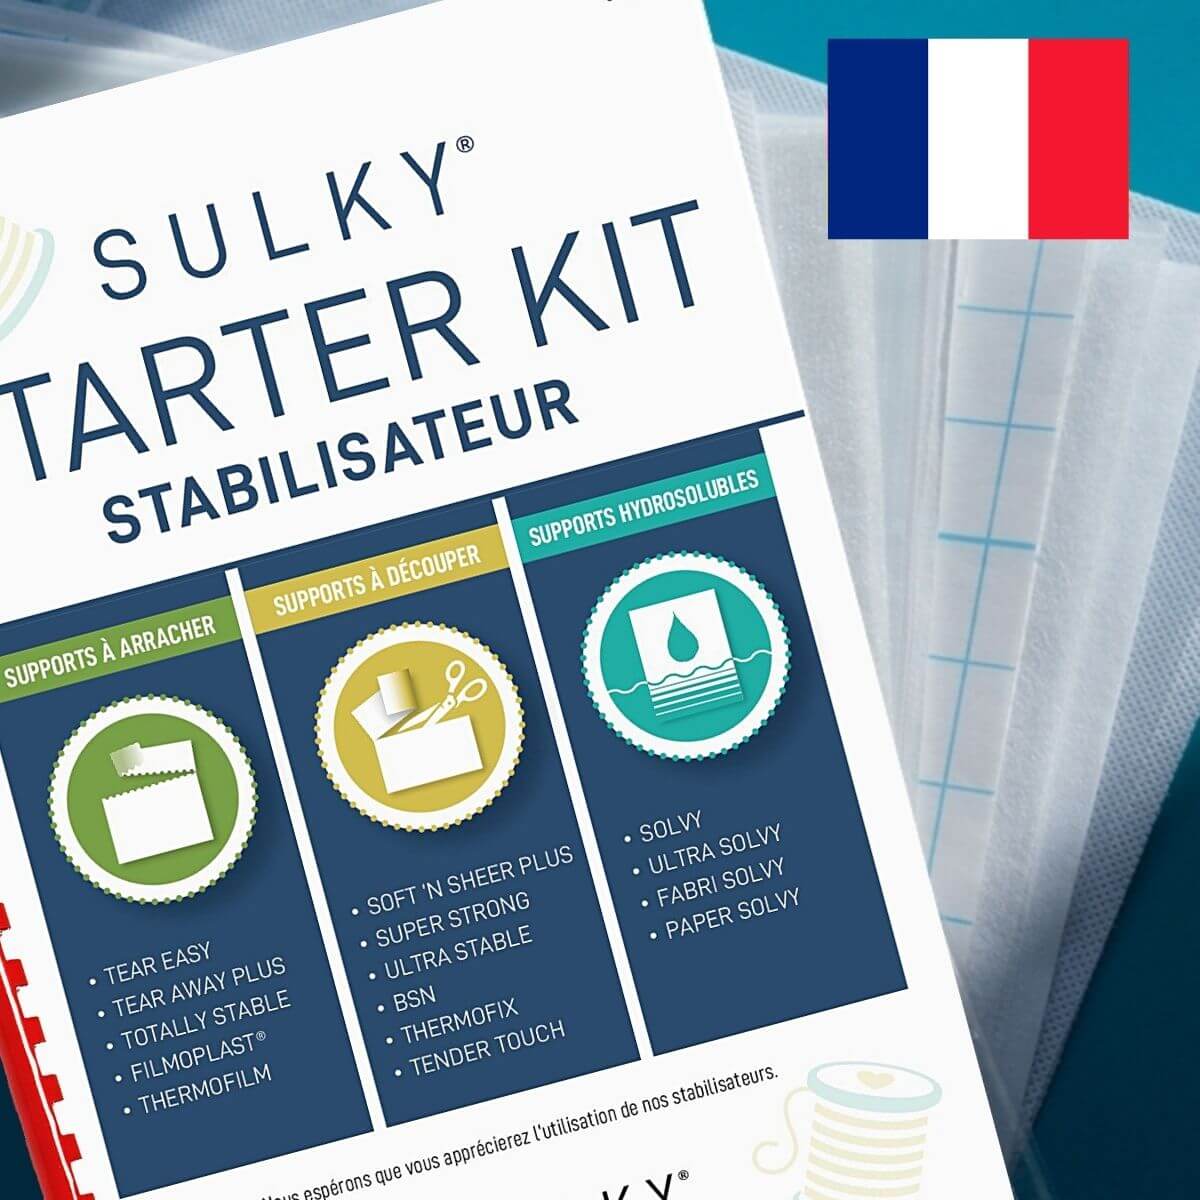 SULKY STARTER KIT - Stabilisateur (in French) - Package contains 15 Sampler